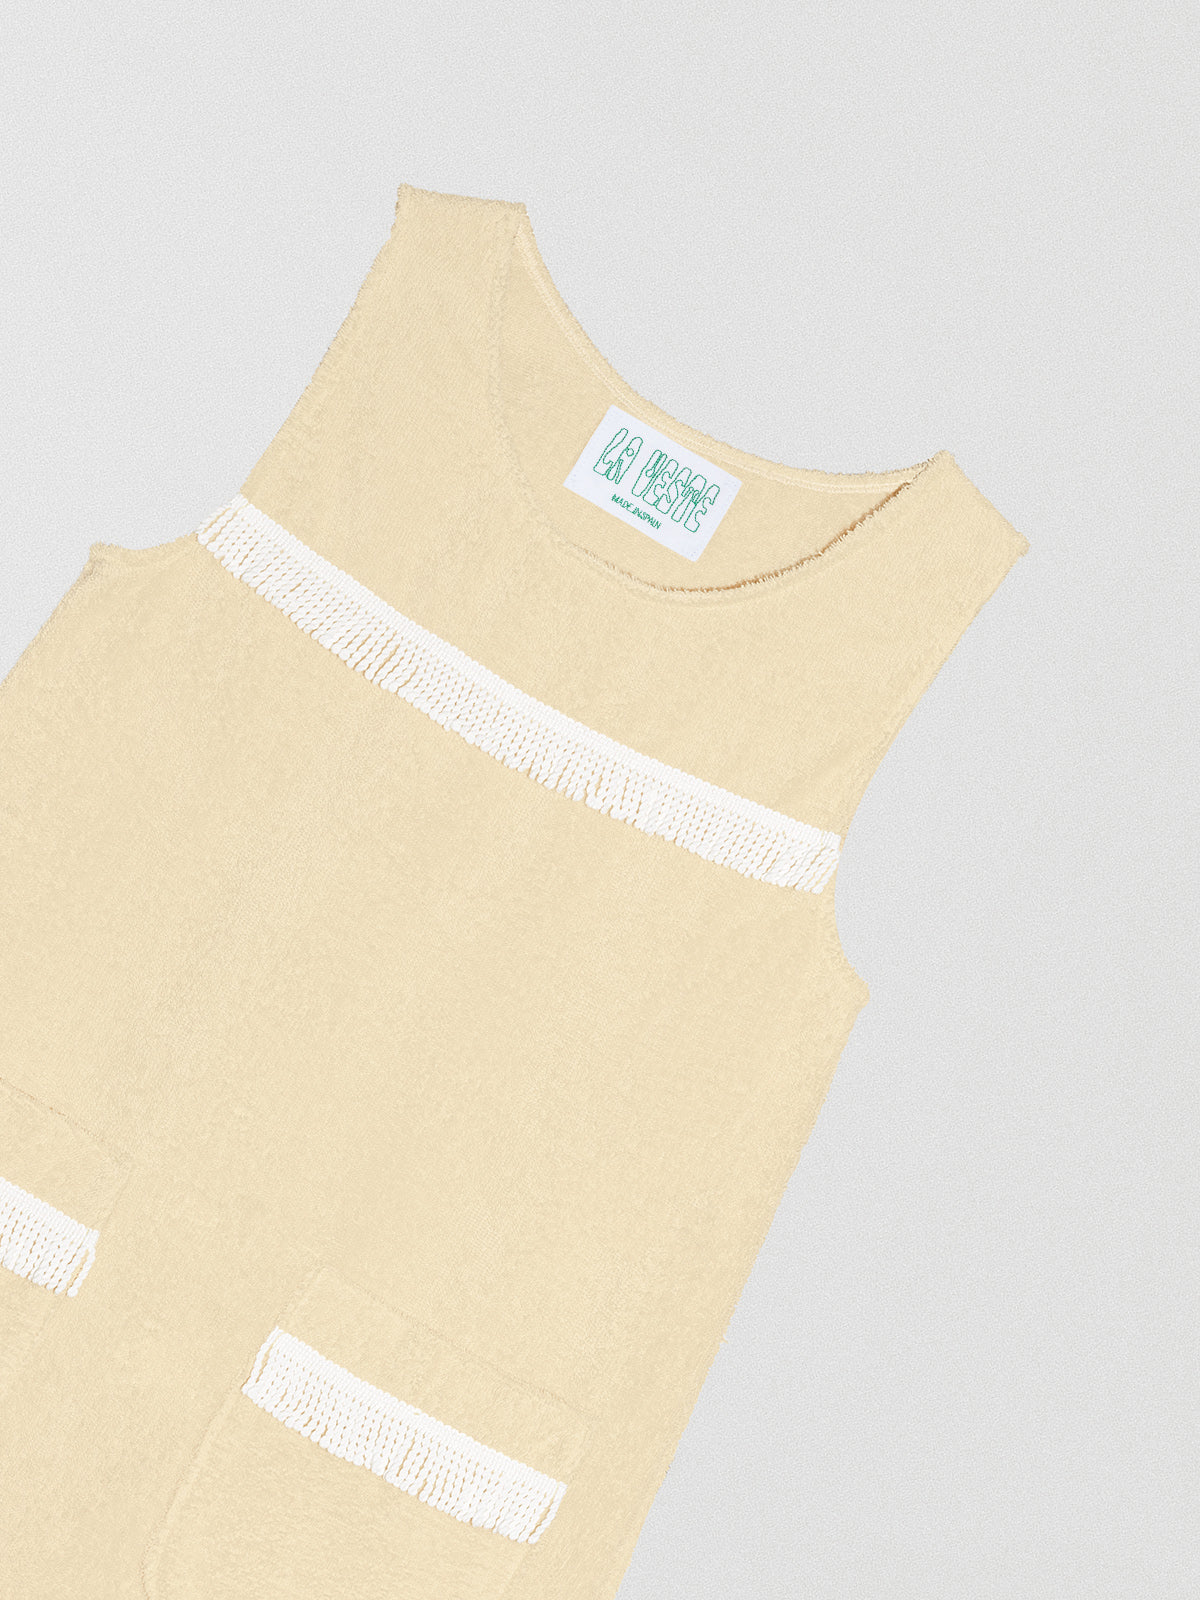 Vanilla colored dress with white fringe details on the chest and bottom